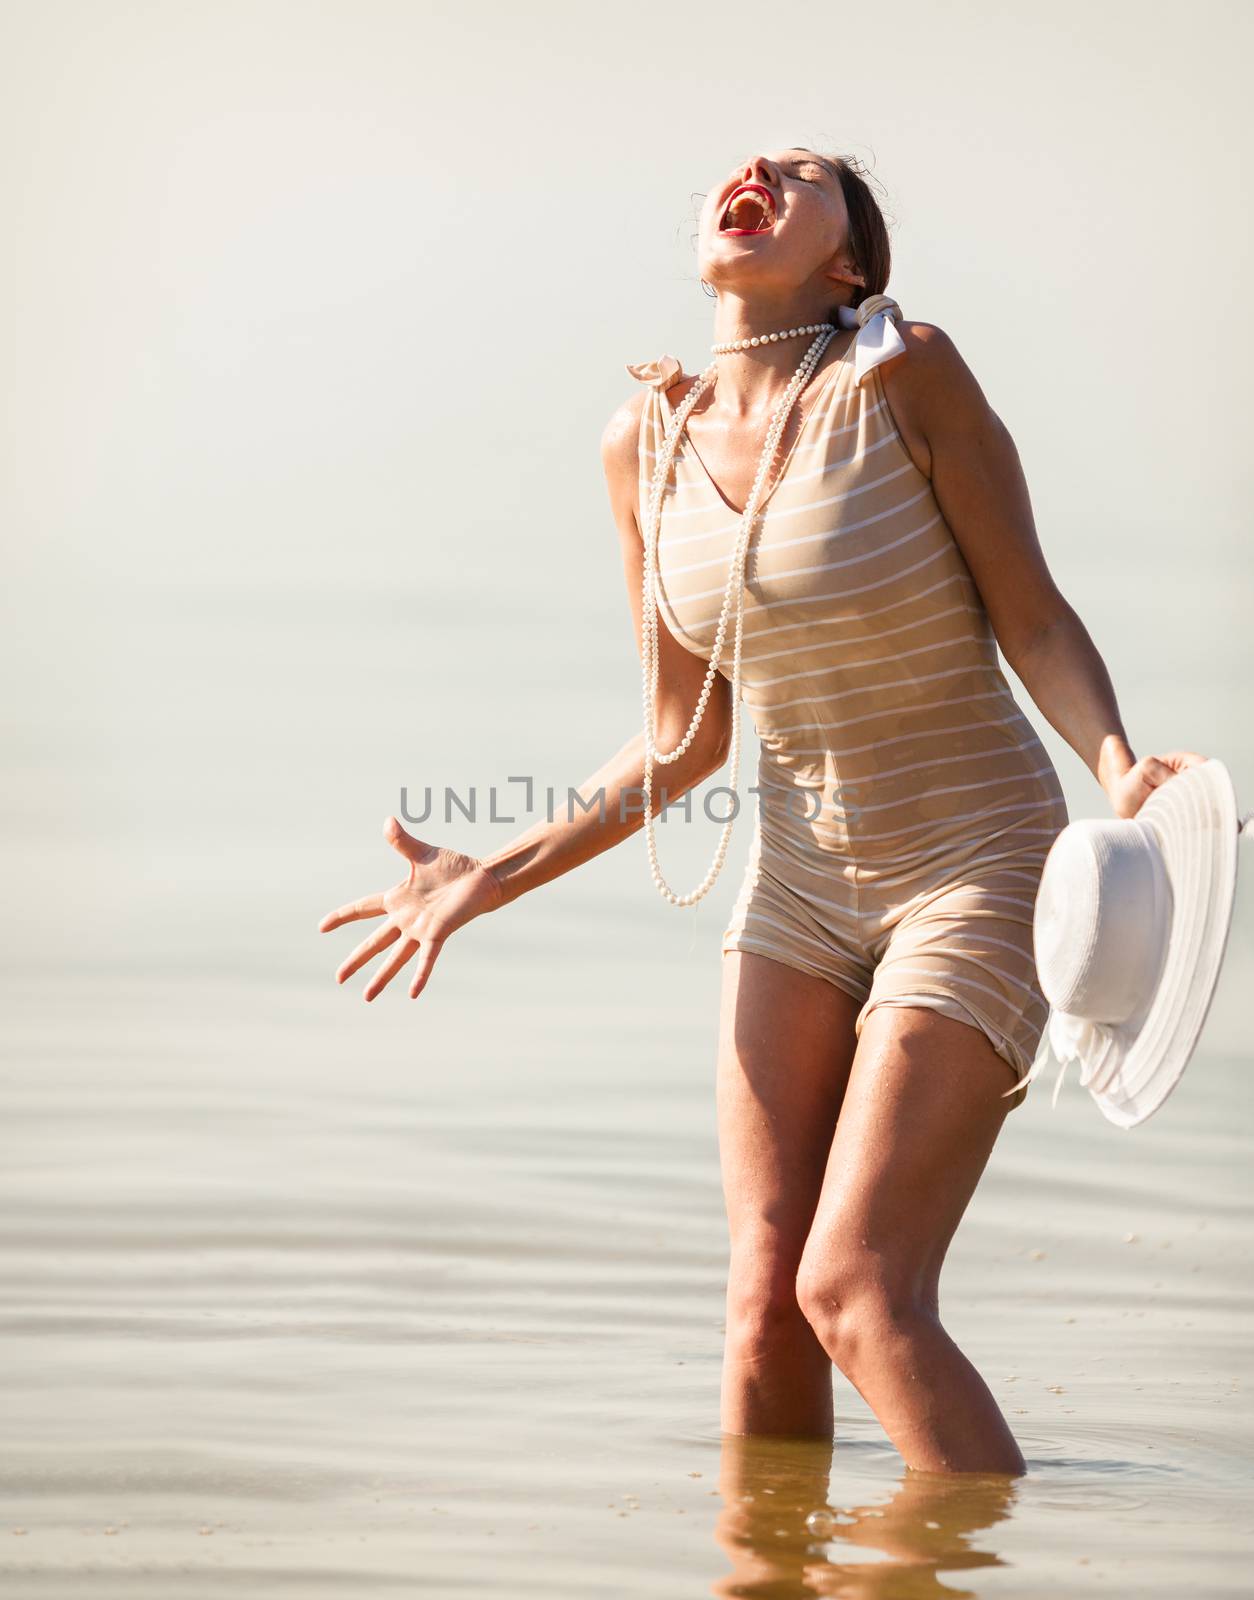 Woman in a striped retro bathing suit in the white hat screams against the sea